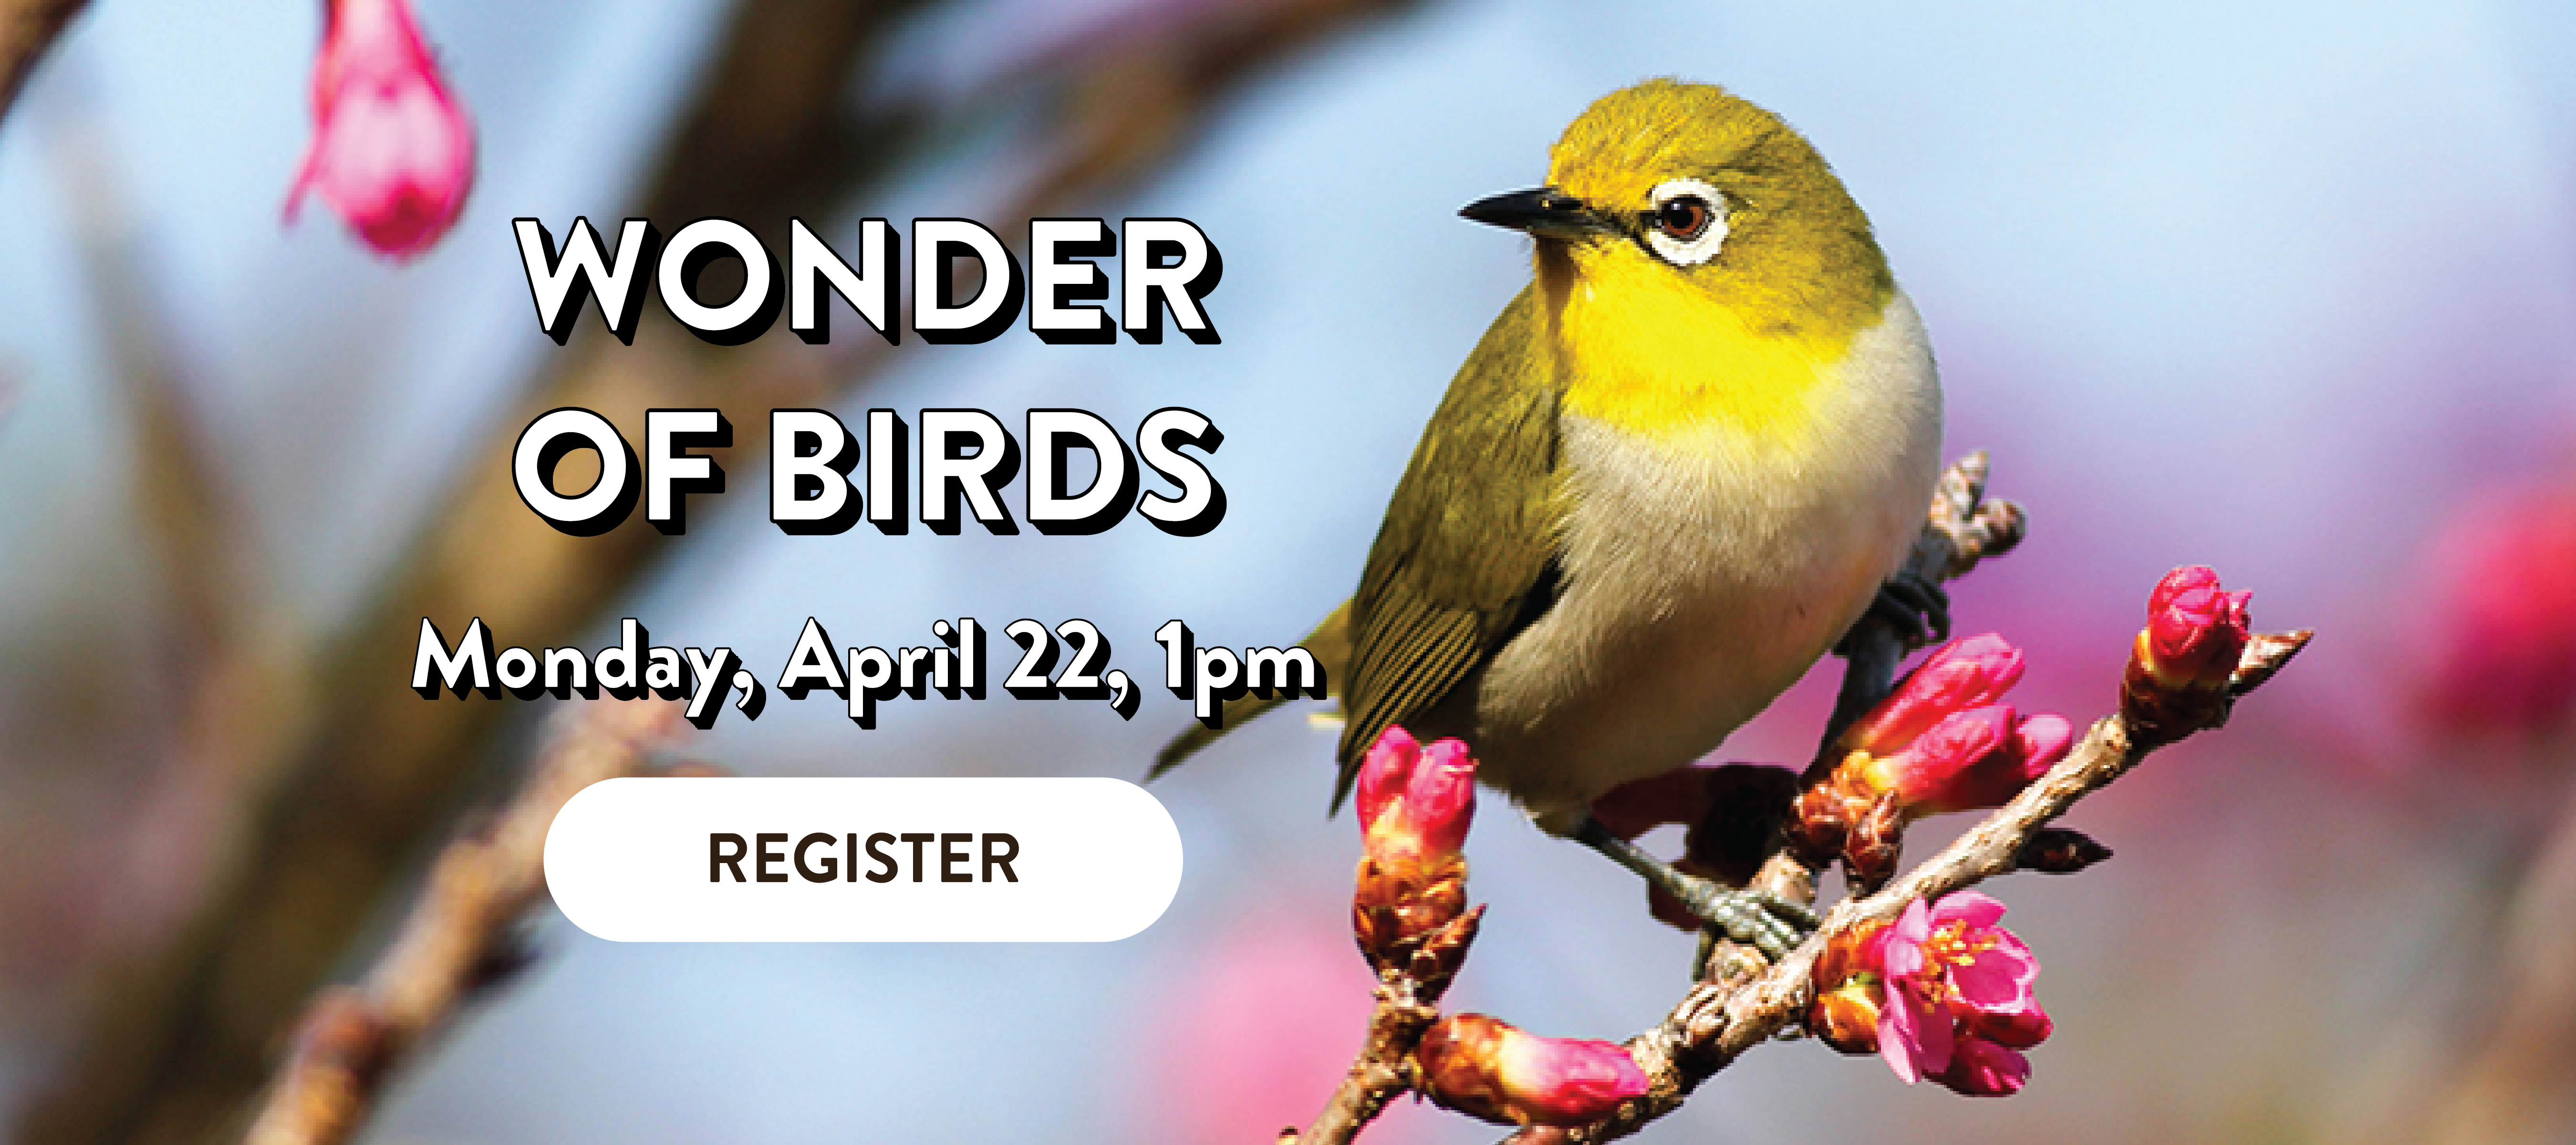 phpl, Prospect Heights Public Library, Wonder of Birds, Earth Day, Brookfield Zoo, In-person, Zoom, Speaker, Habitats, Nests, Animal Ambassadors, nature, outdoors, Adult